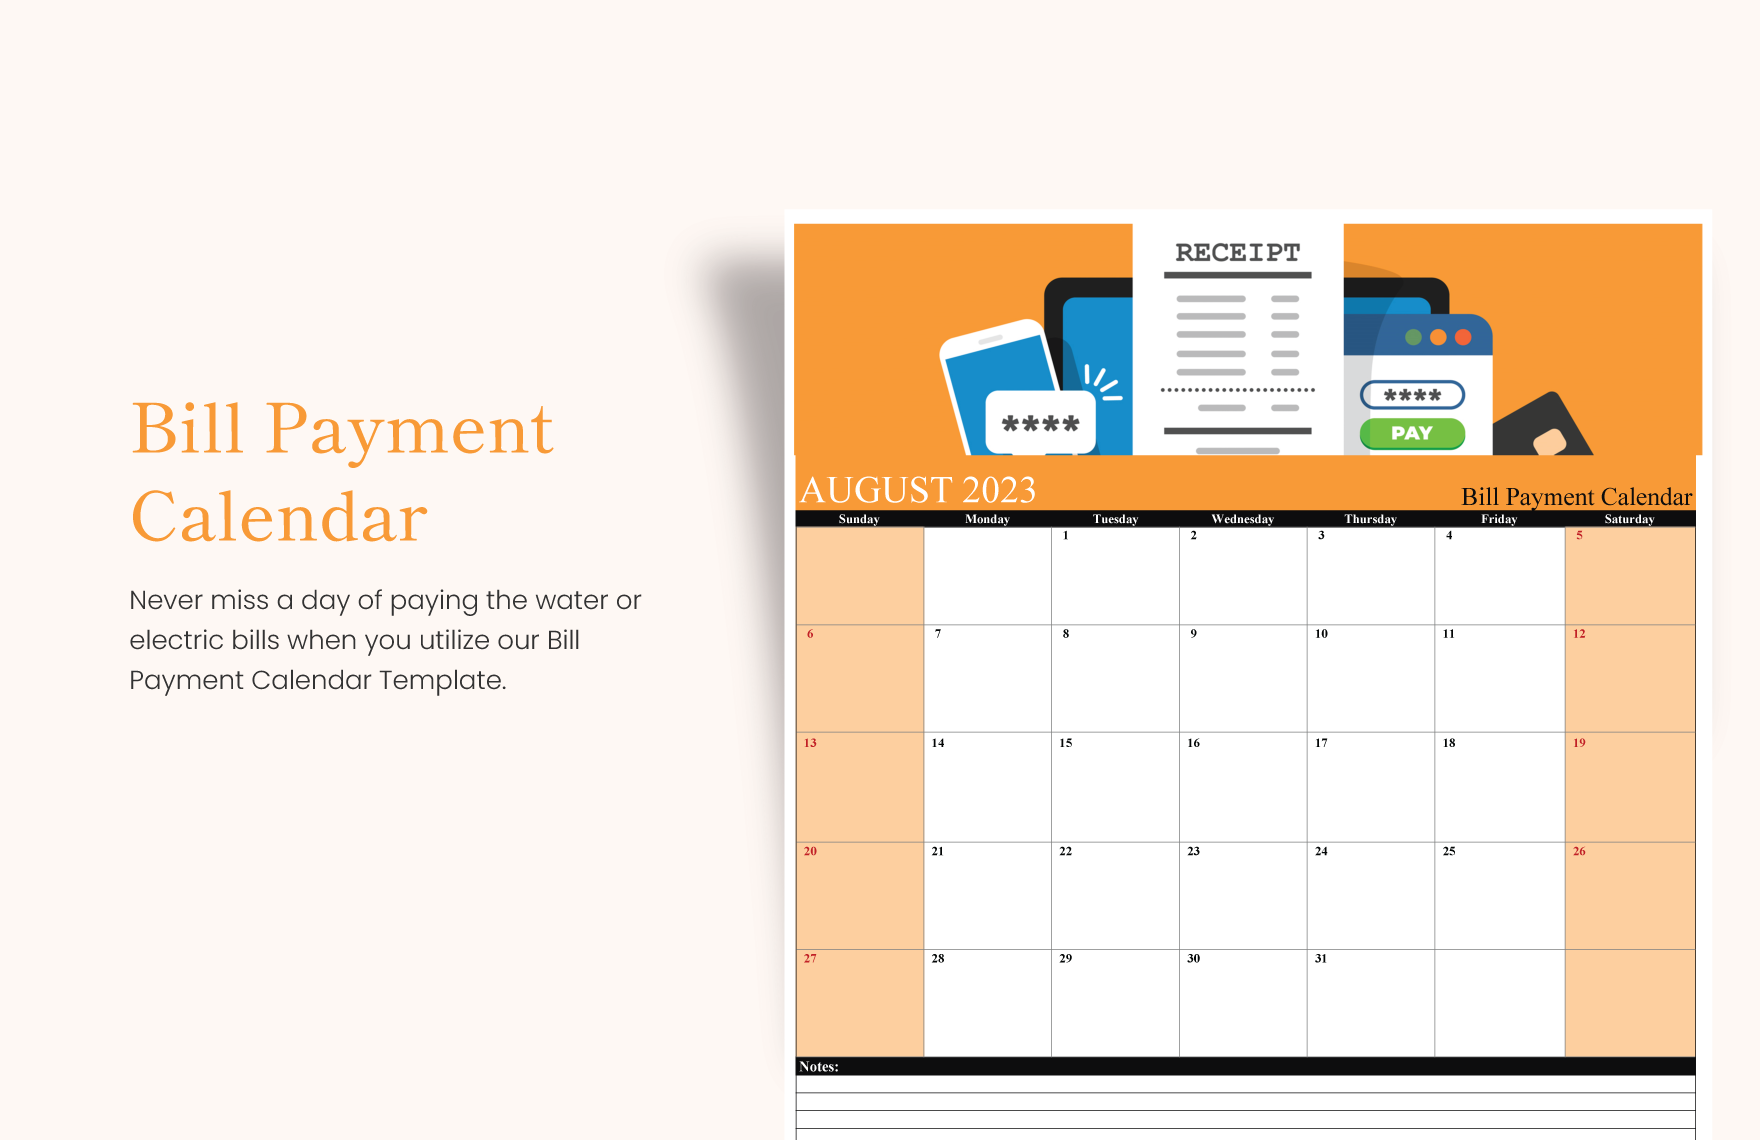 Free Bill Payment Calendar Download in Excel, Google Sheets